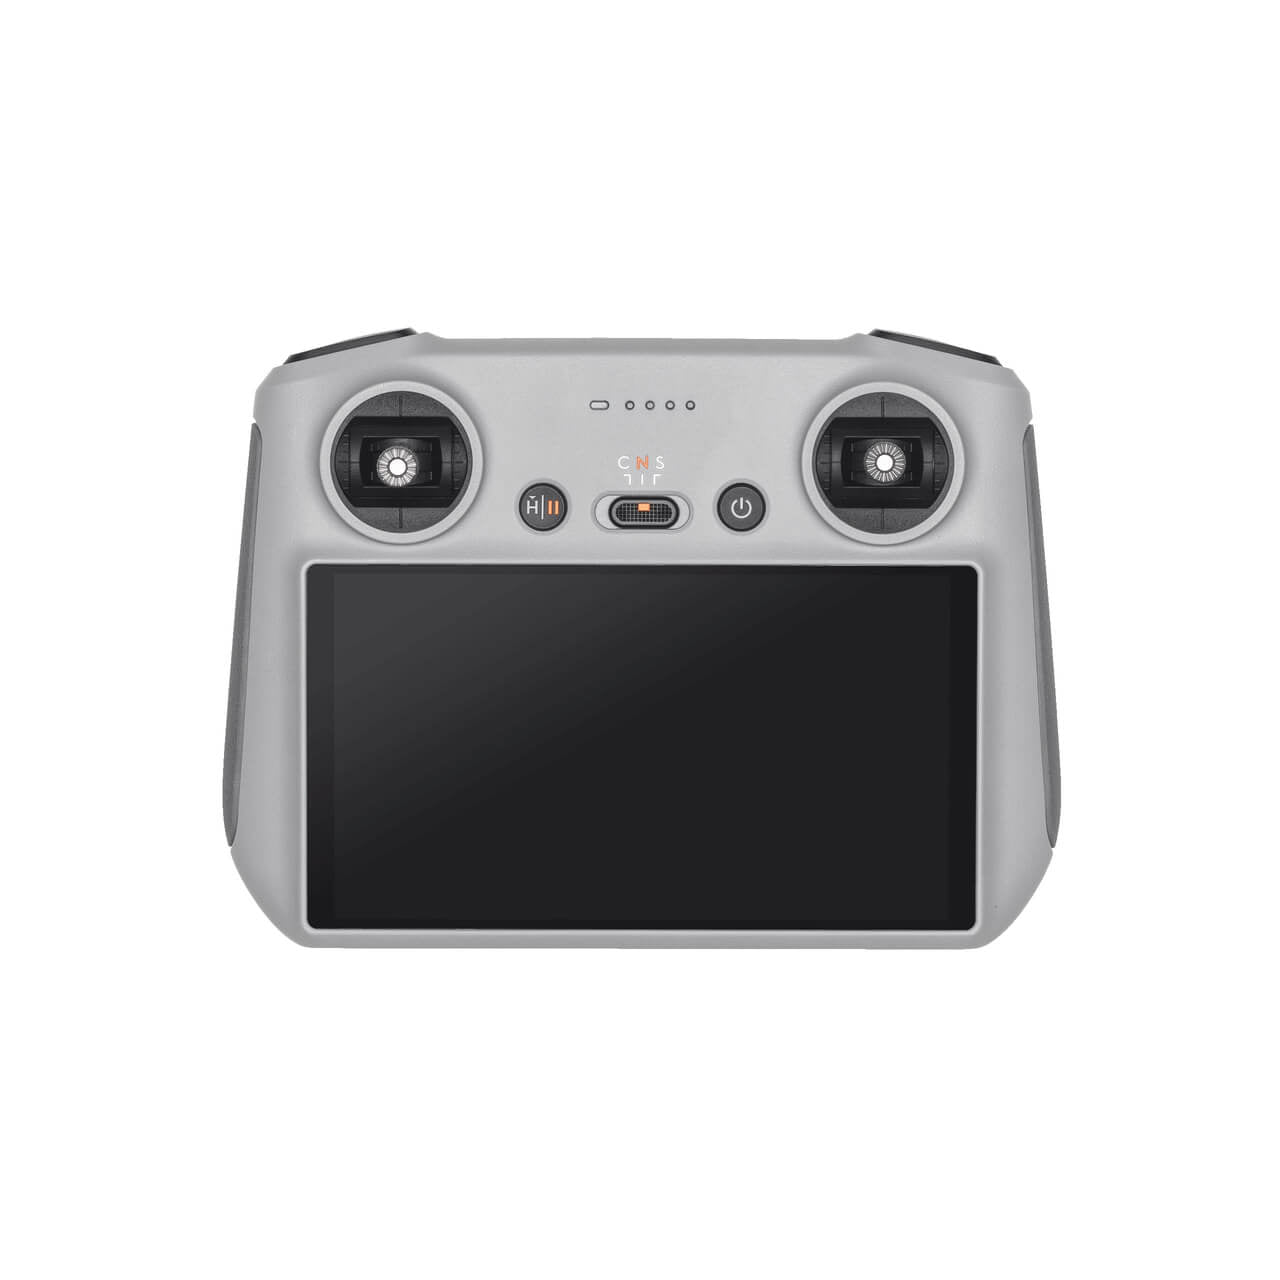 Which drones does DJI RC remote controller with screen support?